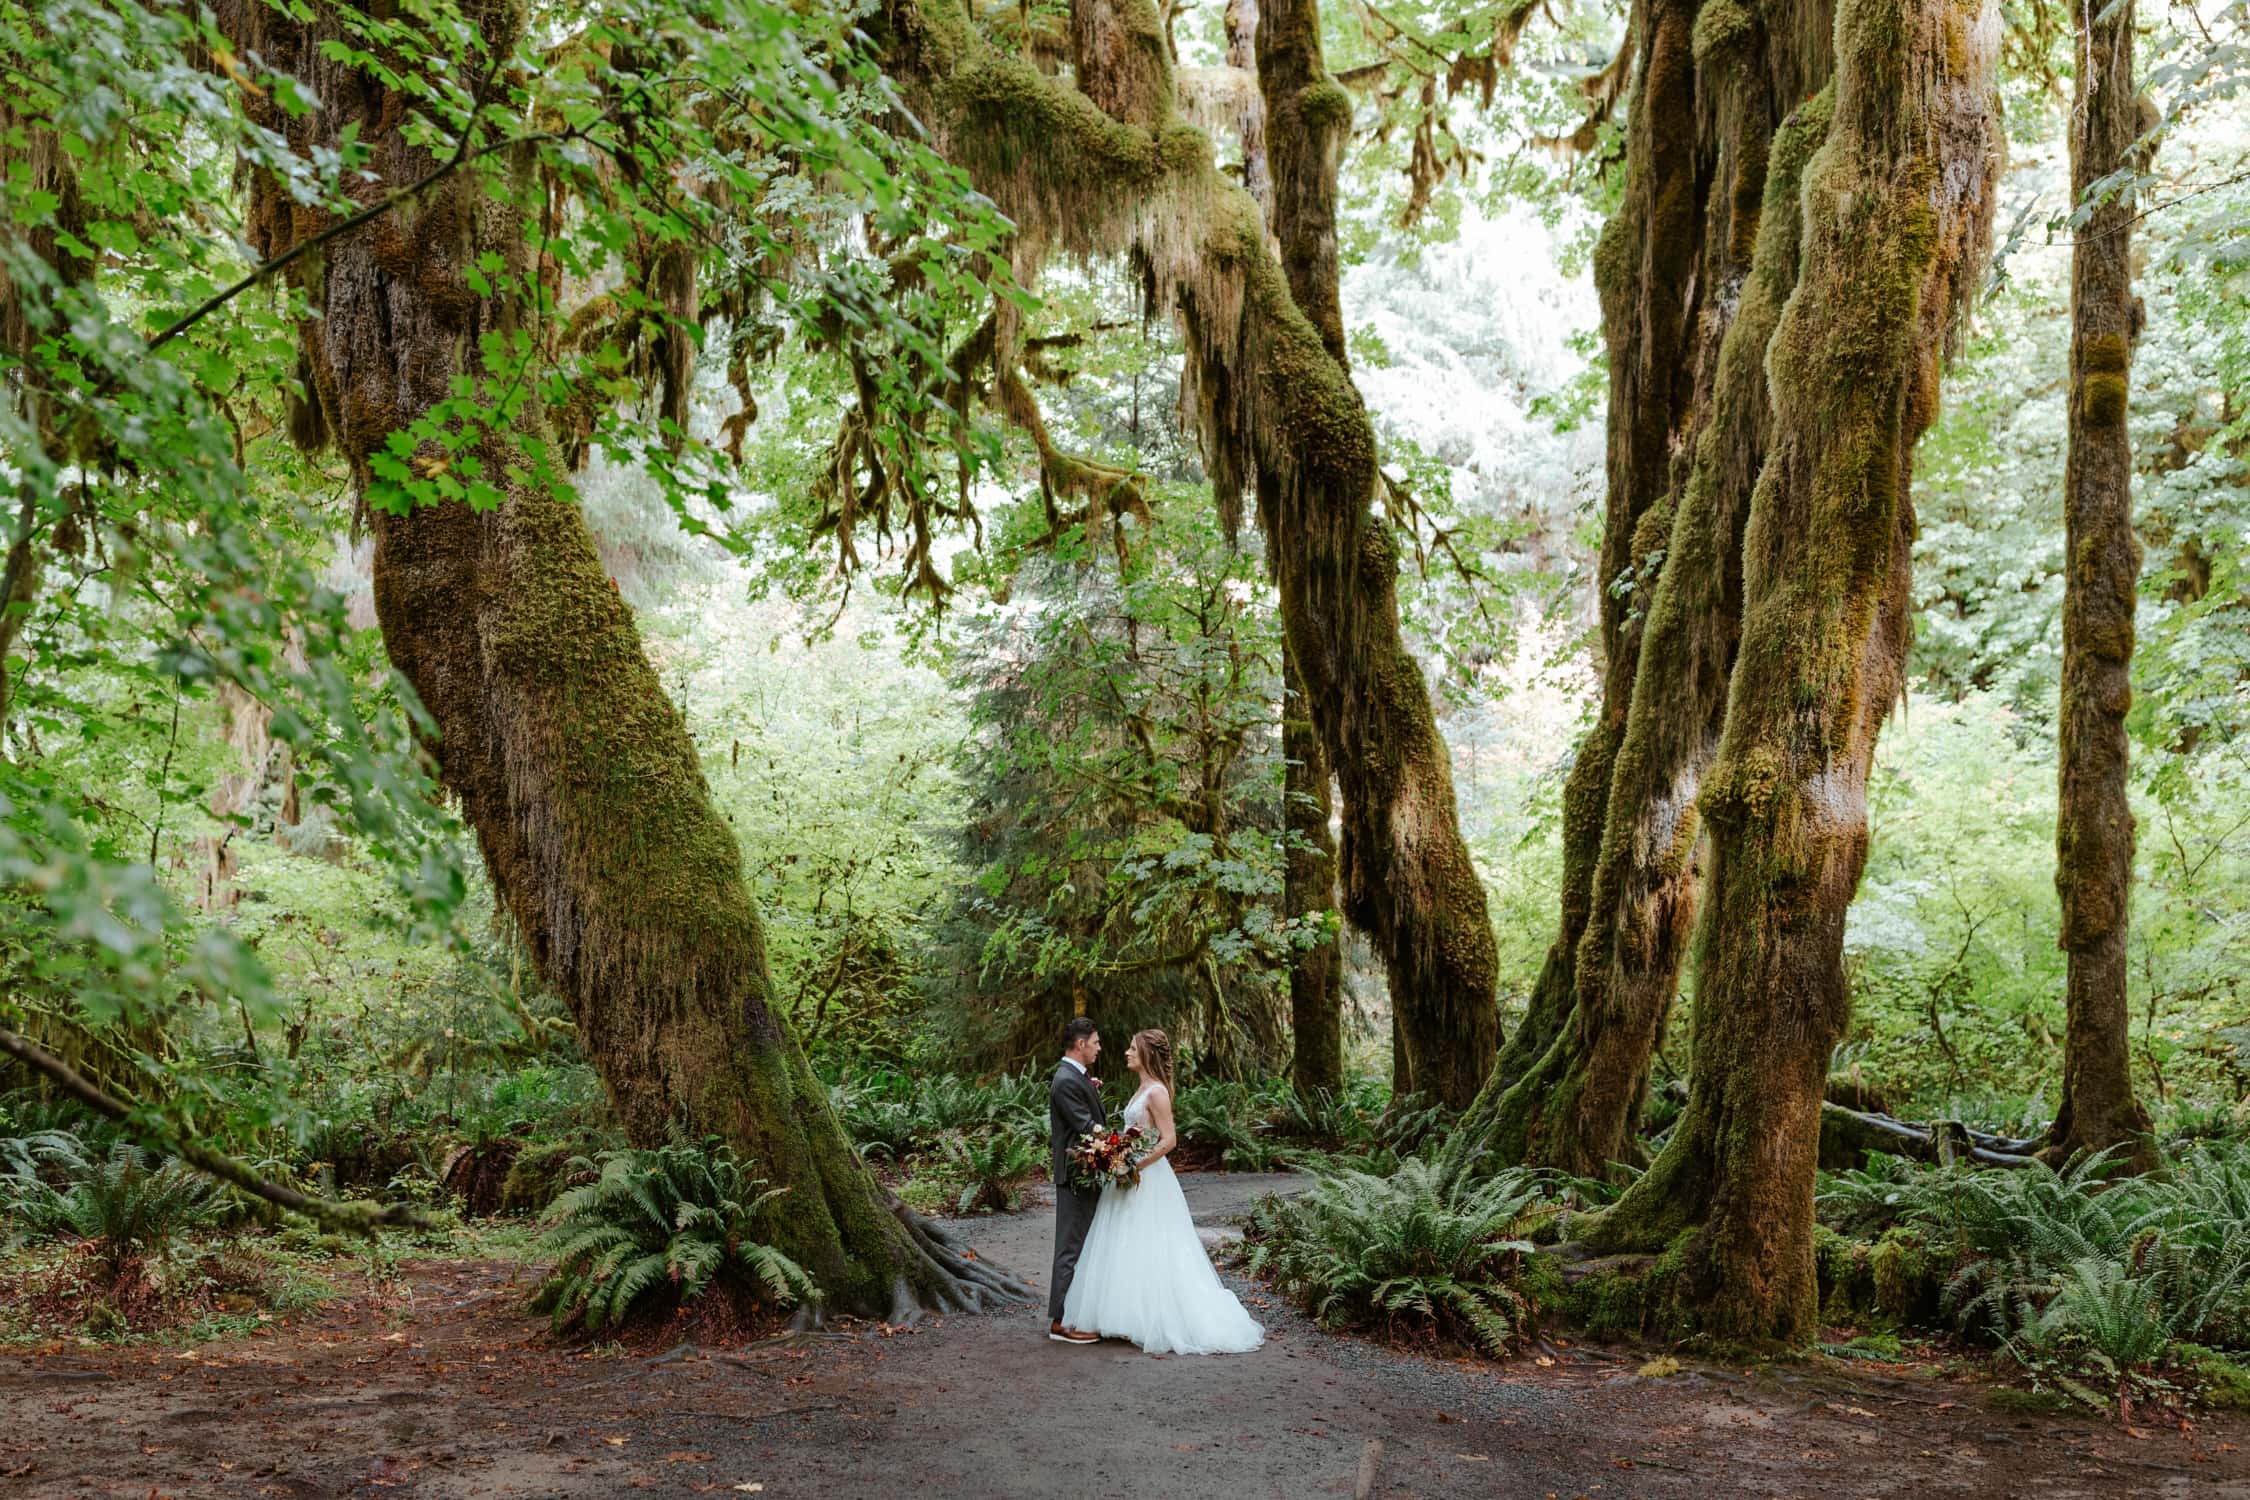 A couple on their wedding day looking at each other in the Hoh Rainforest.